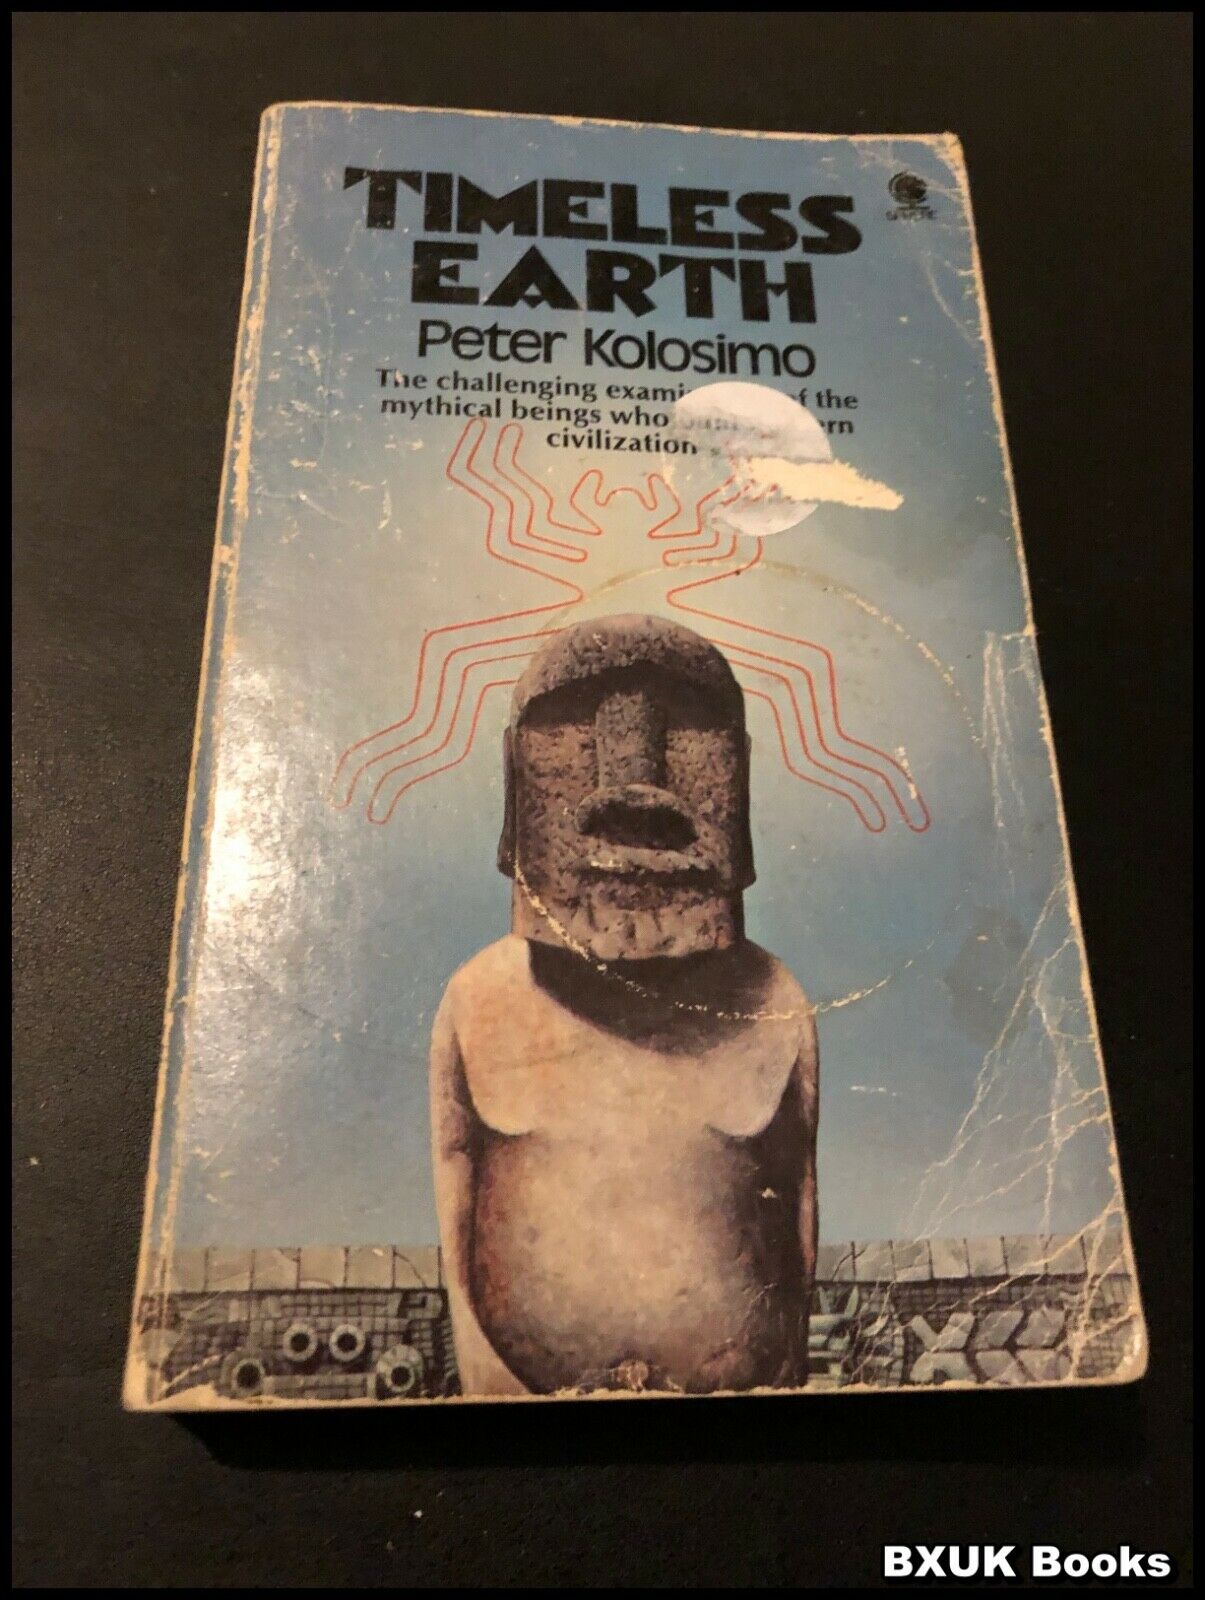 Timeless Earth by Peter Kolosimo (Paperback, 1974)